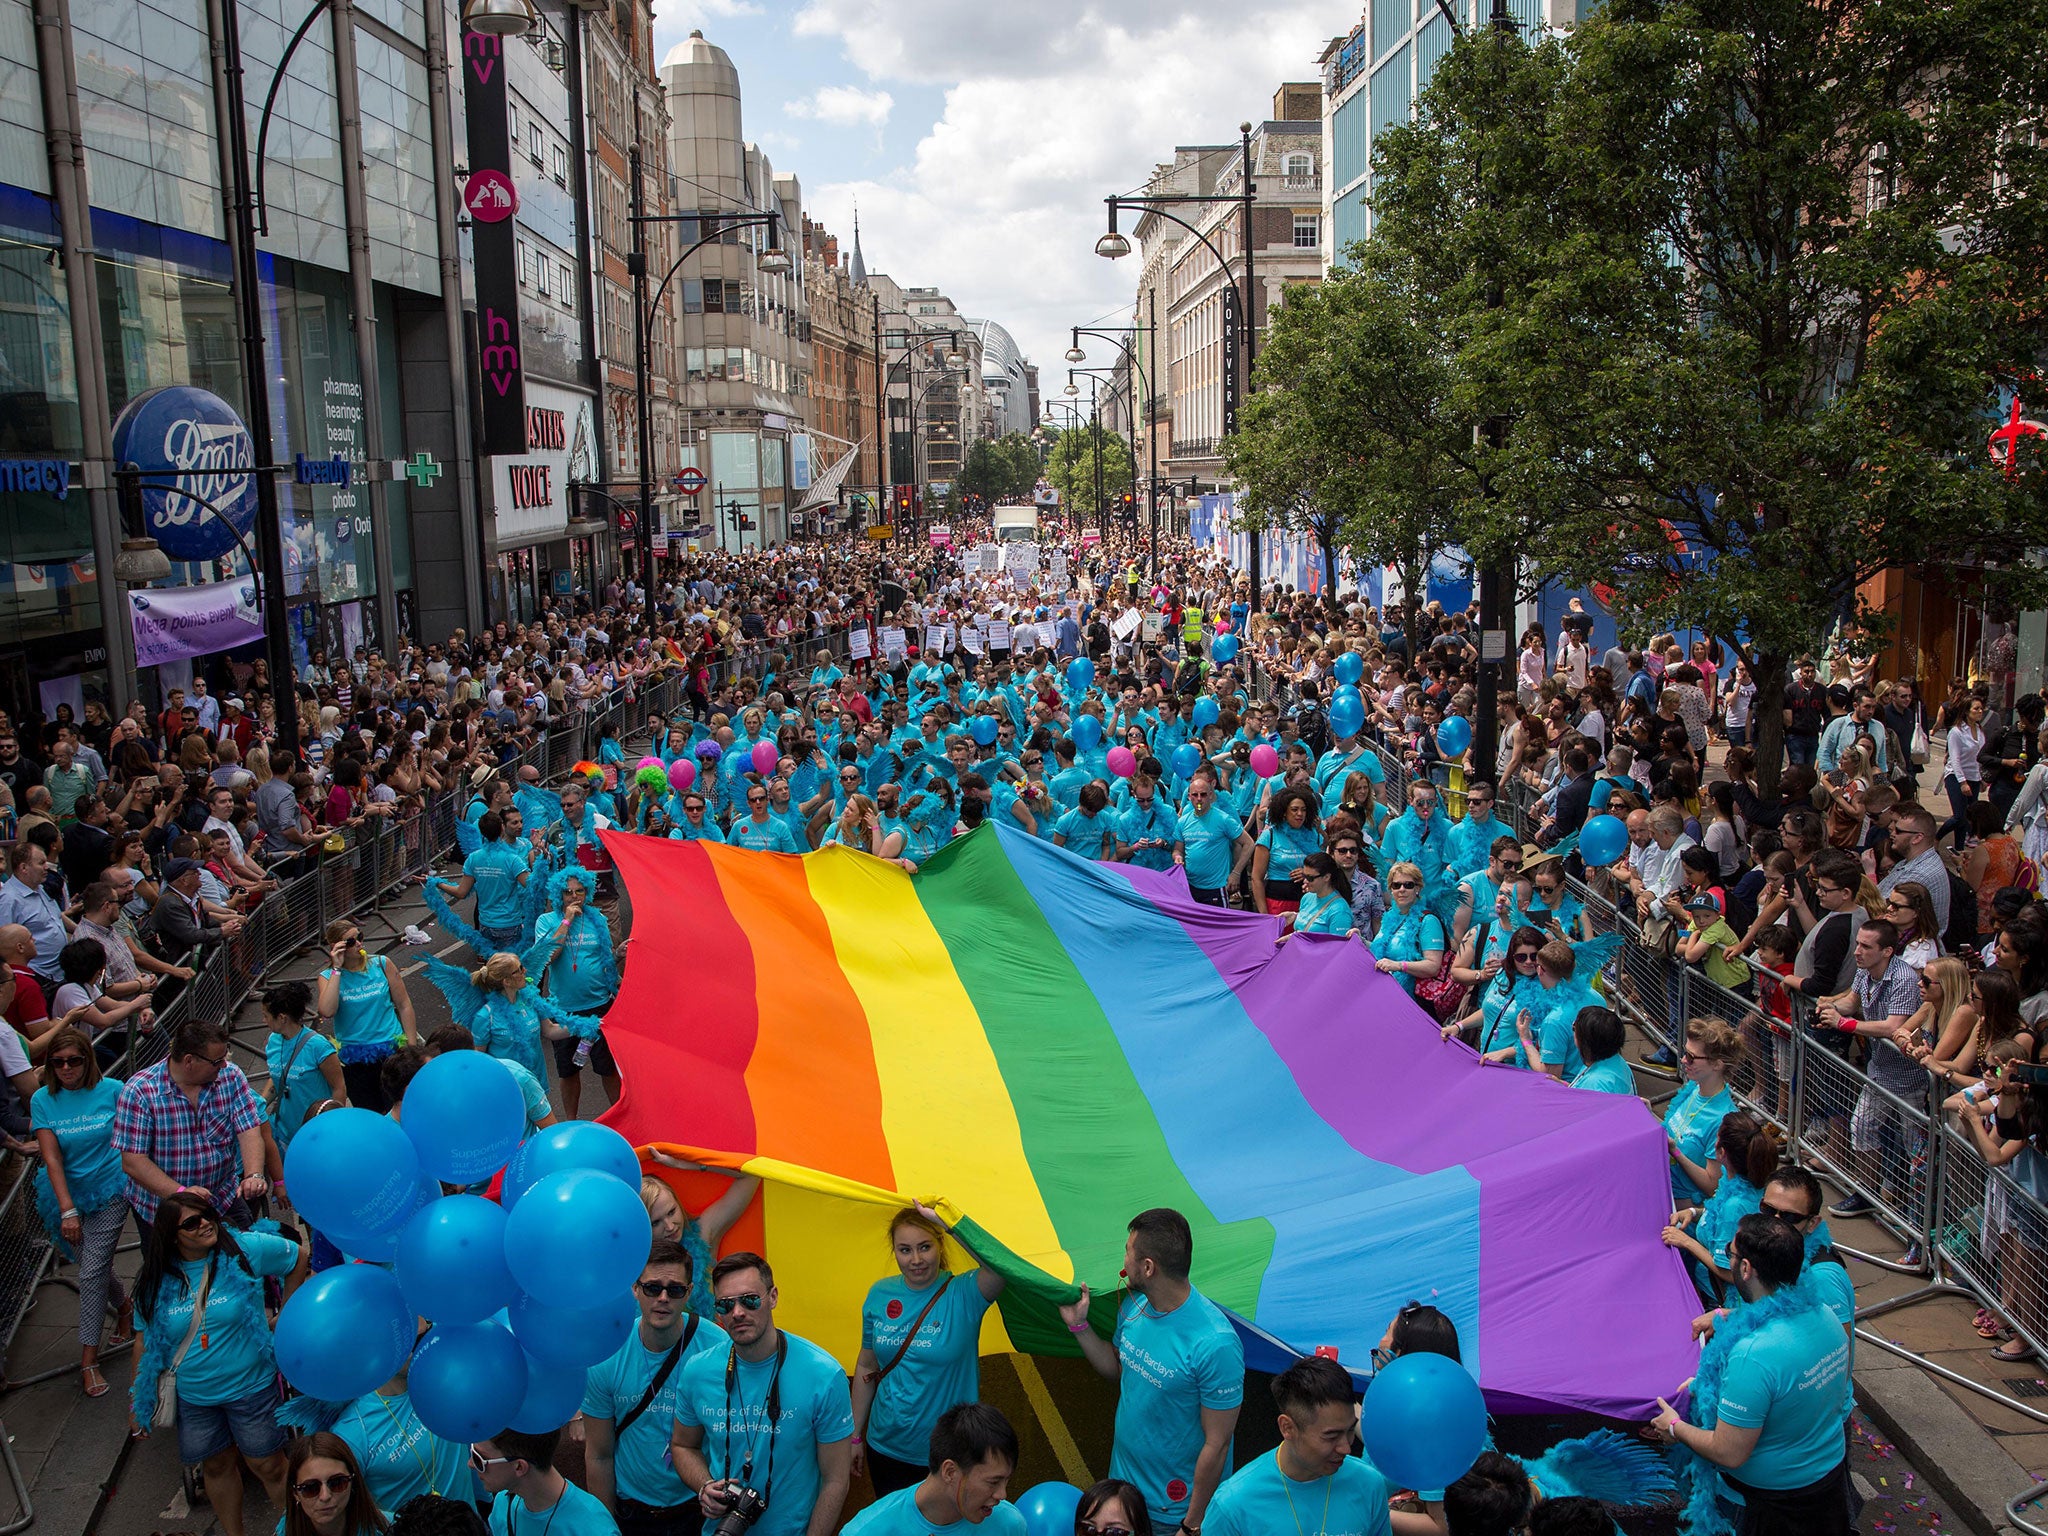 London Pride 30 000 Take Part In Biggest Ever Gay Pride Parade The Independent